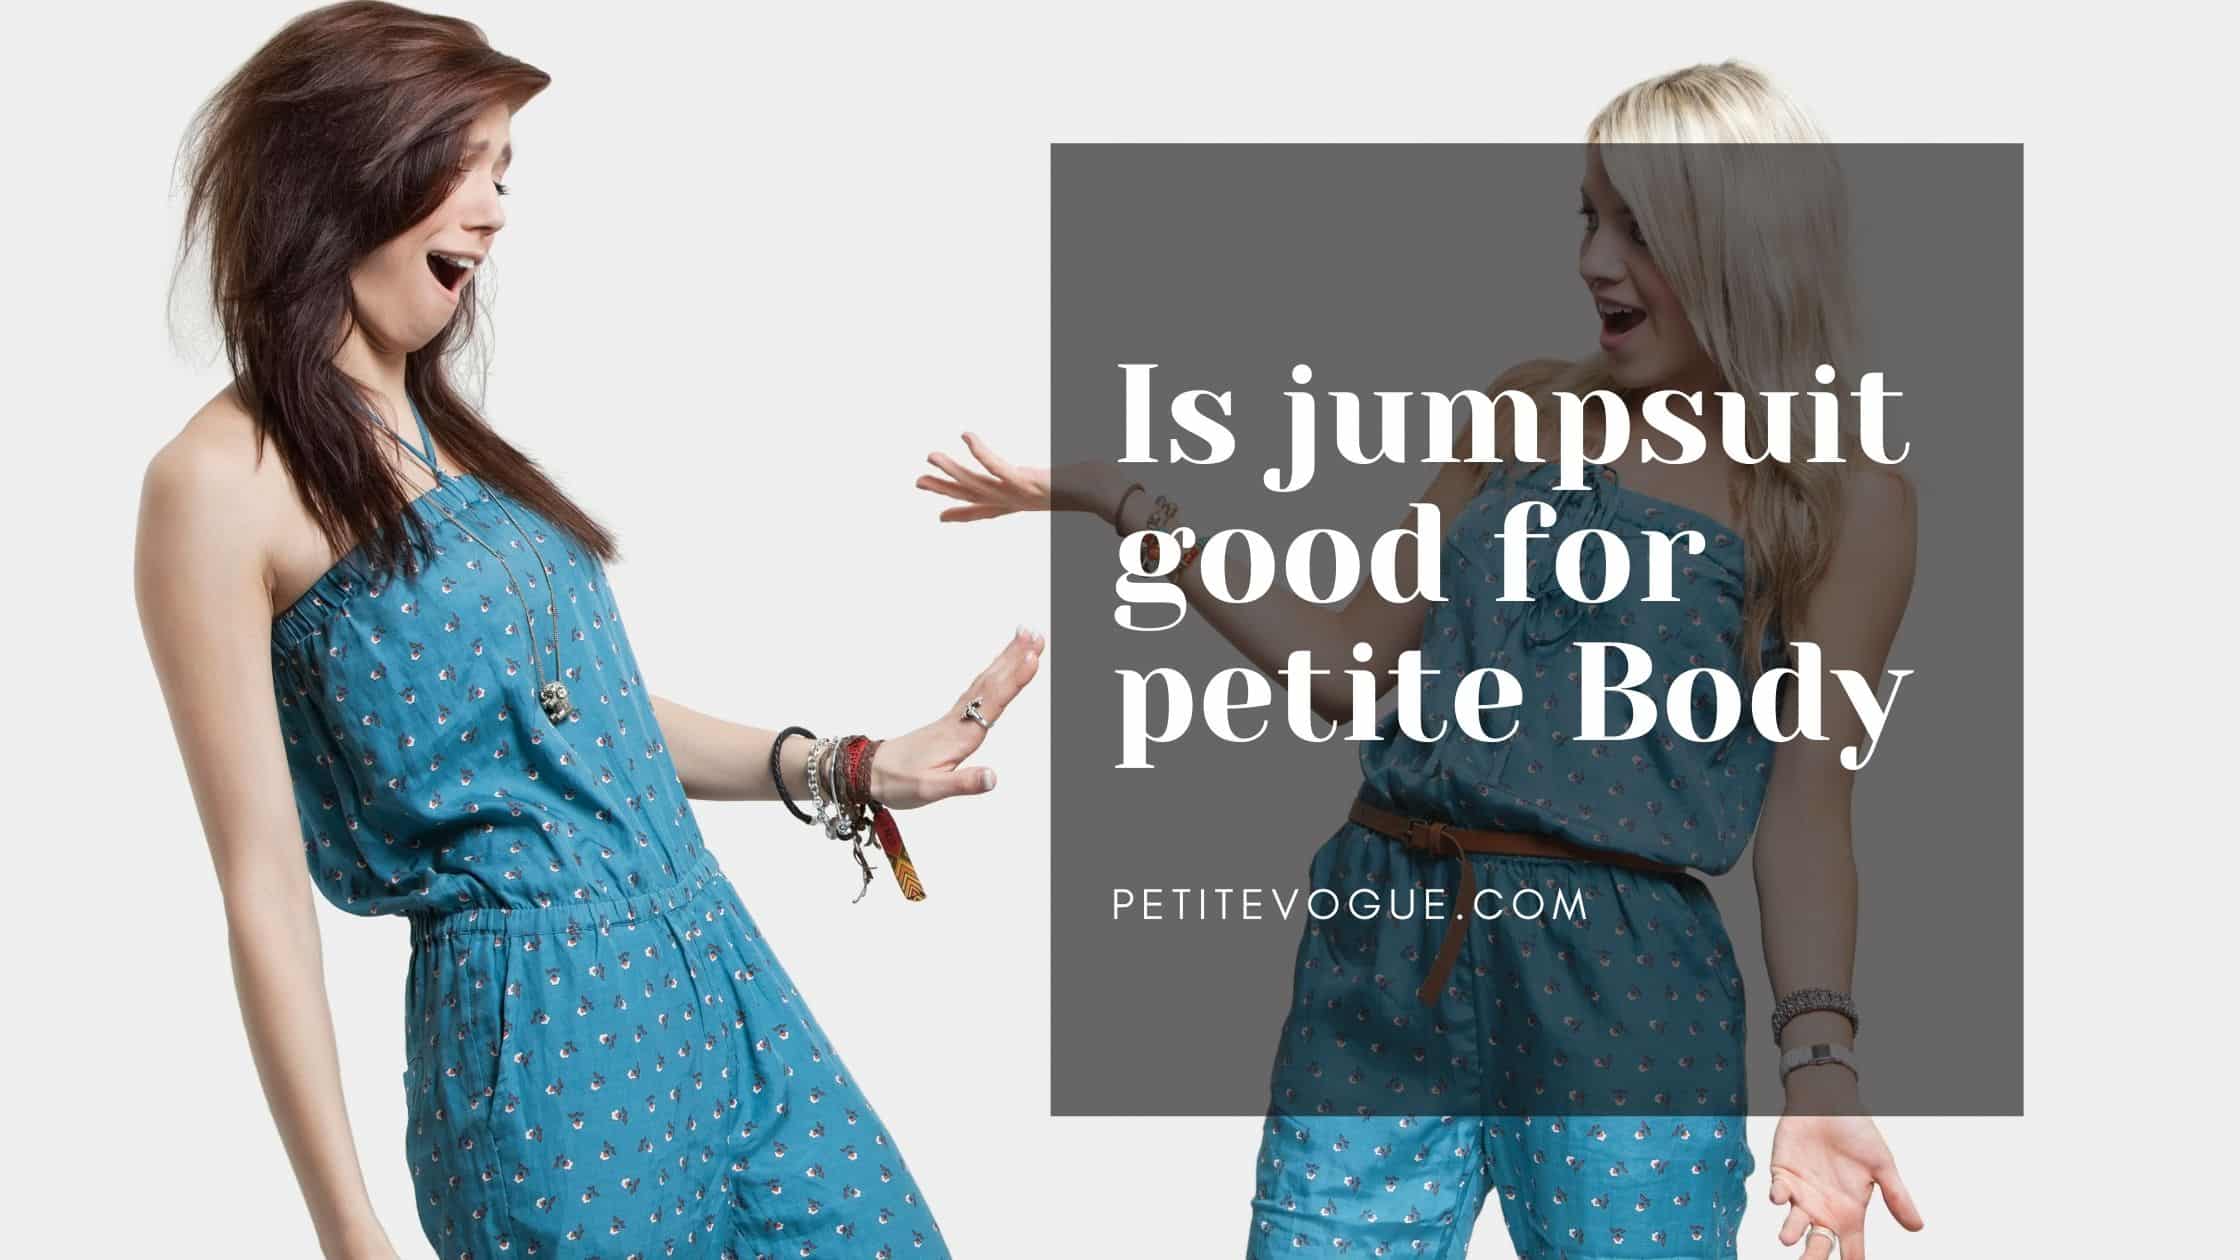 What Body Types Look Good in Jumpsuits - Petite Dressing